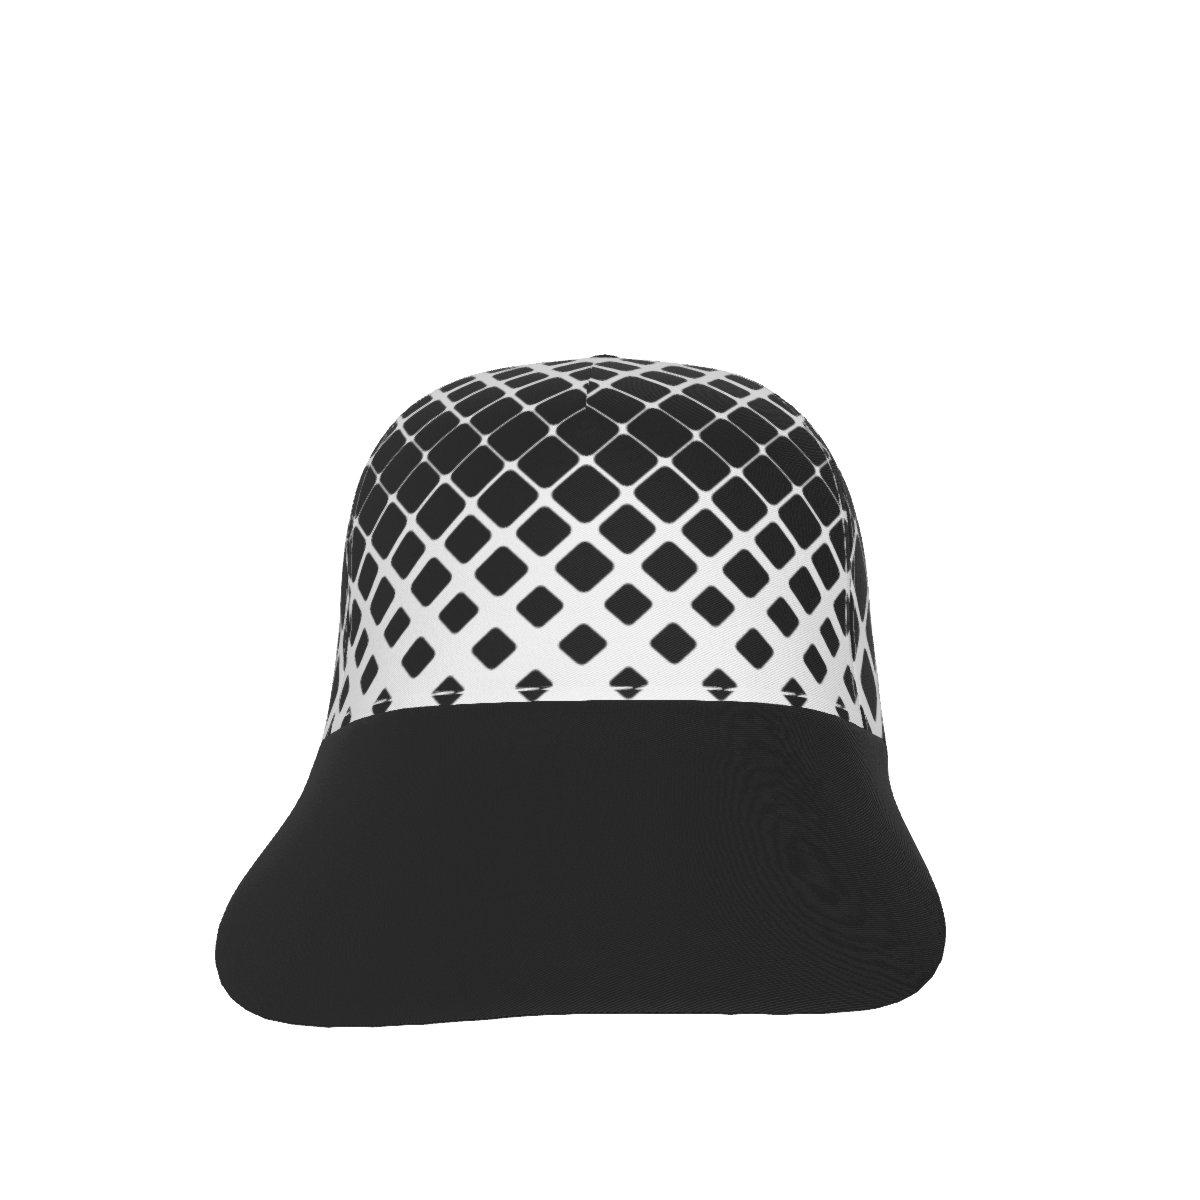 Black And White with Black Peaked Cap - DromedarShop.com Online Boutique